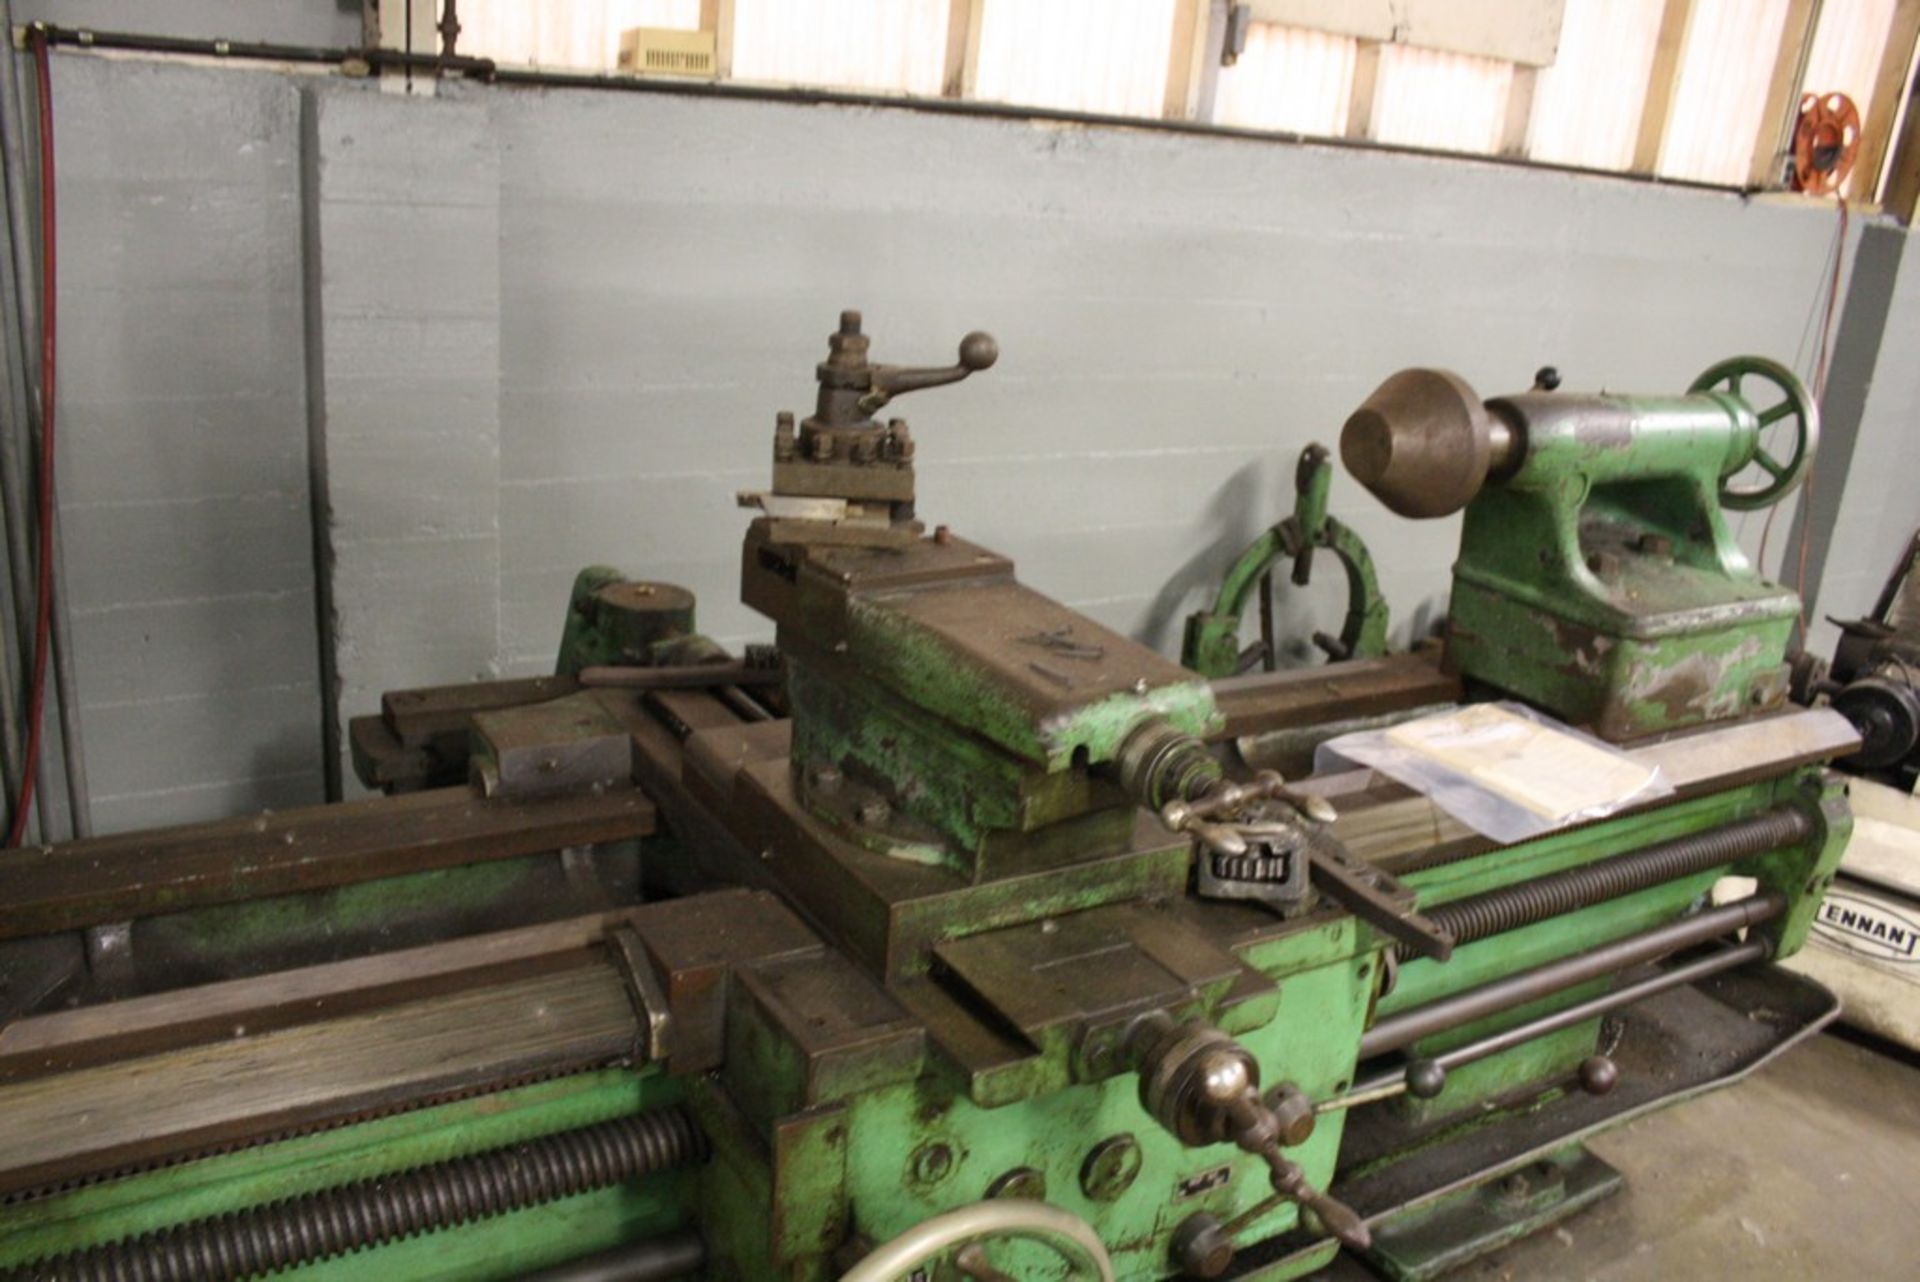 HEYLIGENSTAEDT 36" X84" TOOL ROOM LATHE, S/N 6061-1957, 560 RPM SPINDLE, 24" 4-JAW CHUCK, TAPER - Image 3 of 5